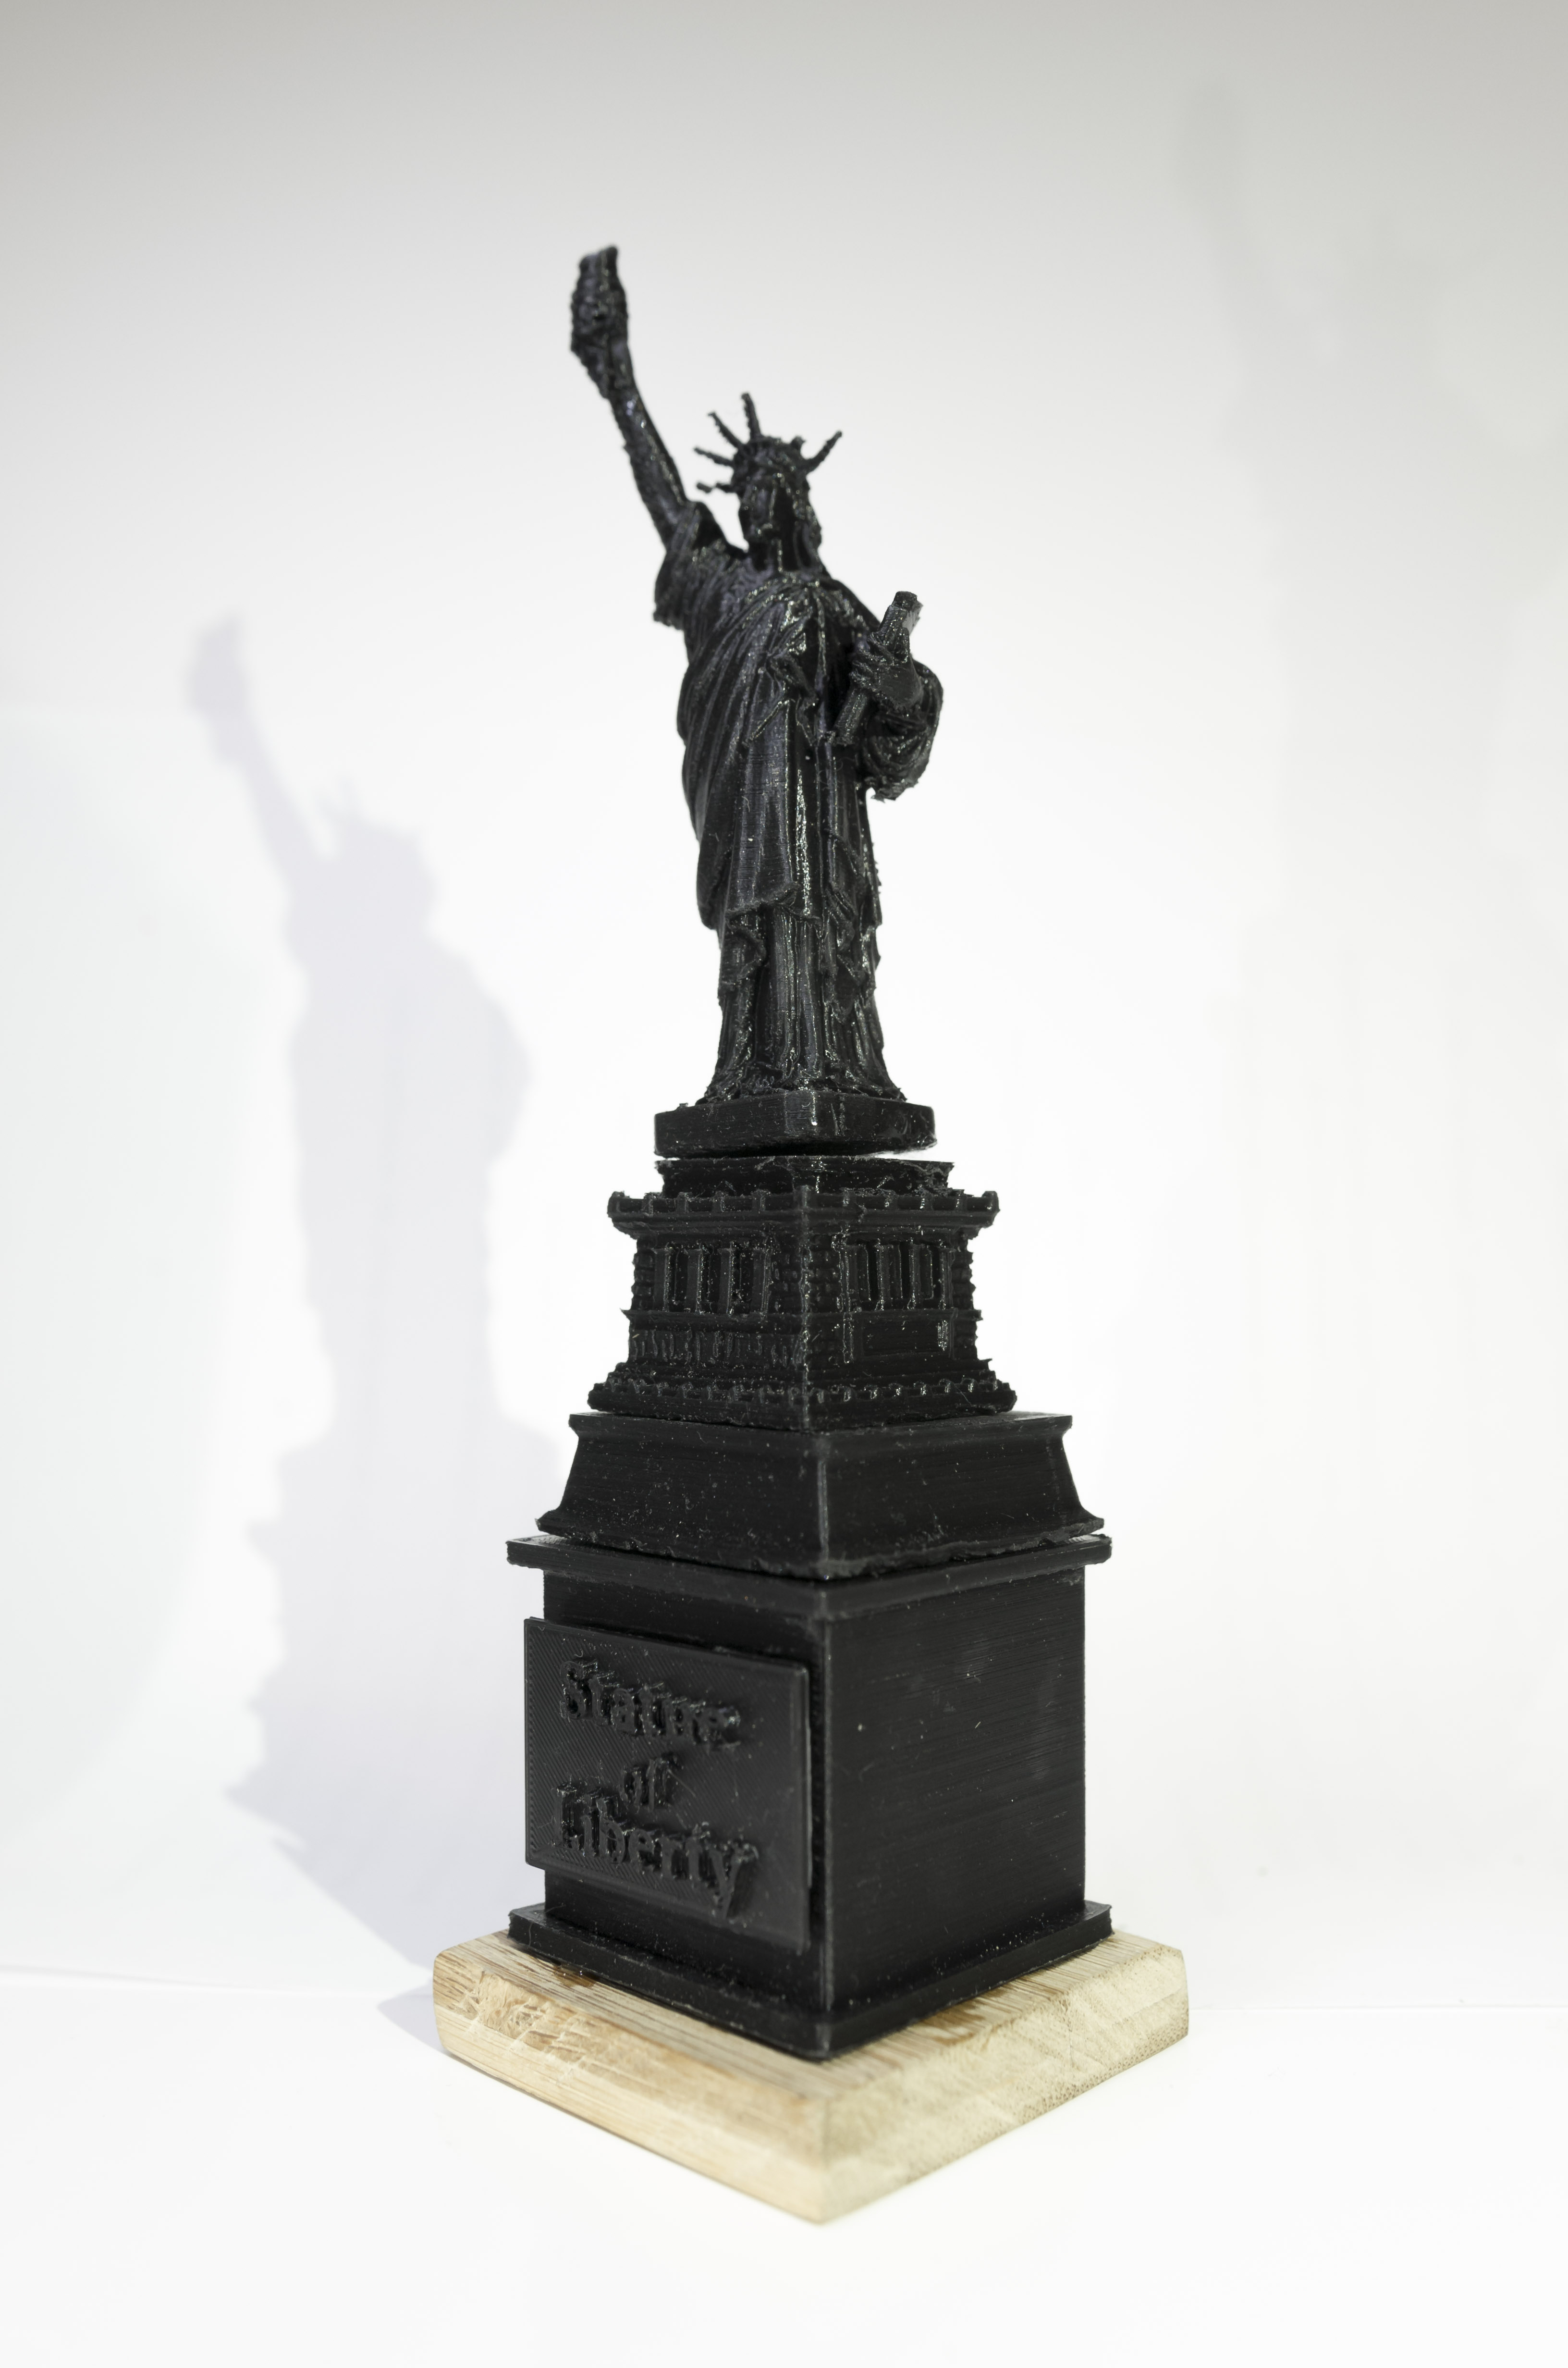 deface-a-statue: Statue of Liberty